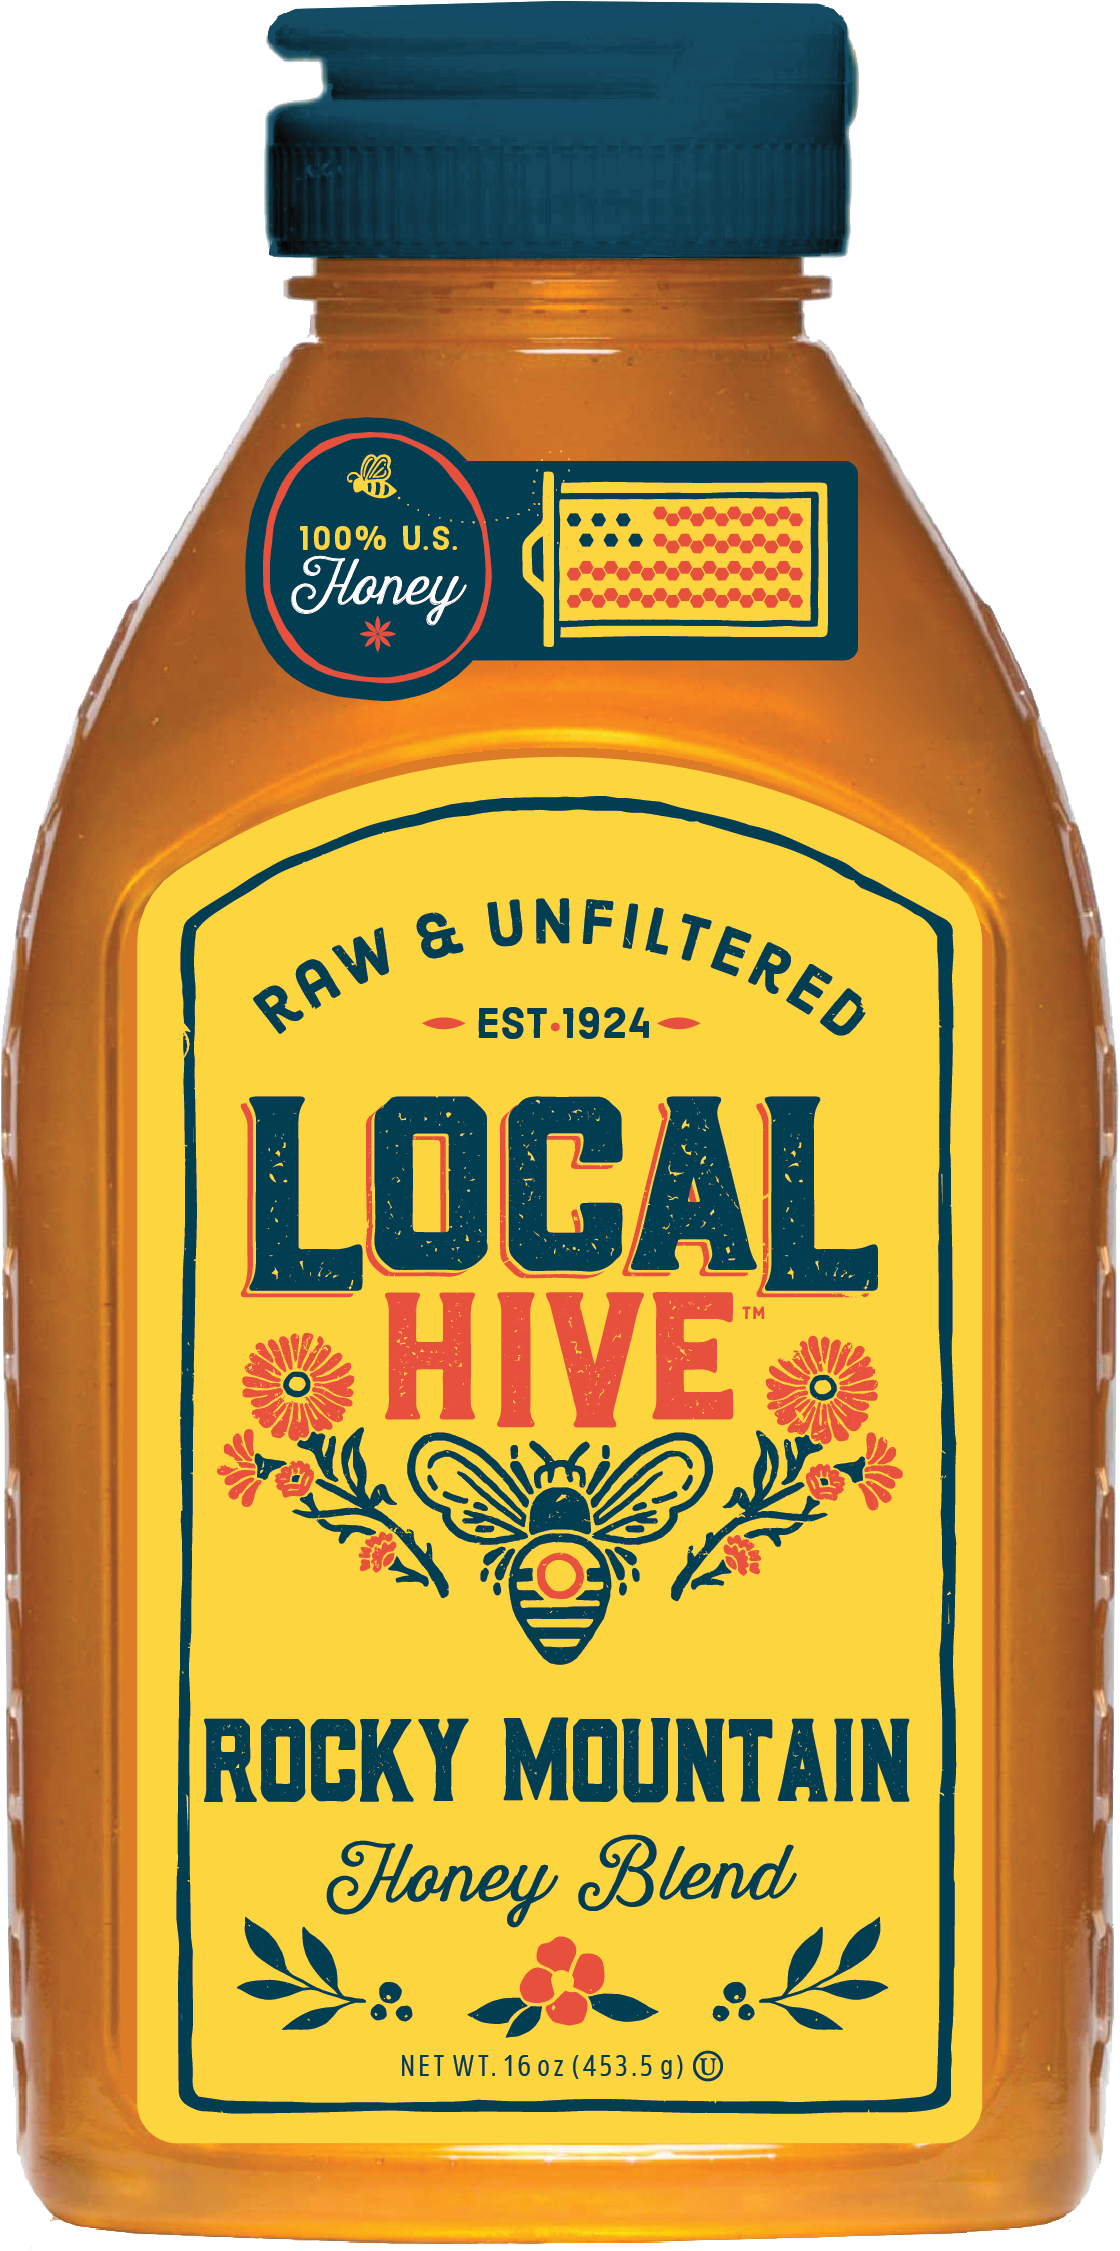 Local Hive Raw & Unfiltered, Rocky Mountain Honey Blend 16oz